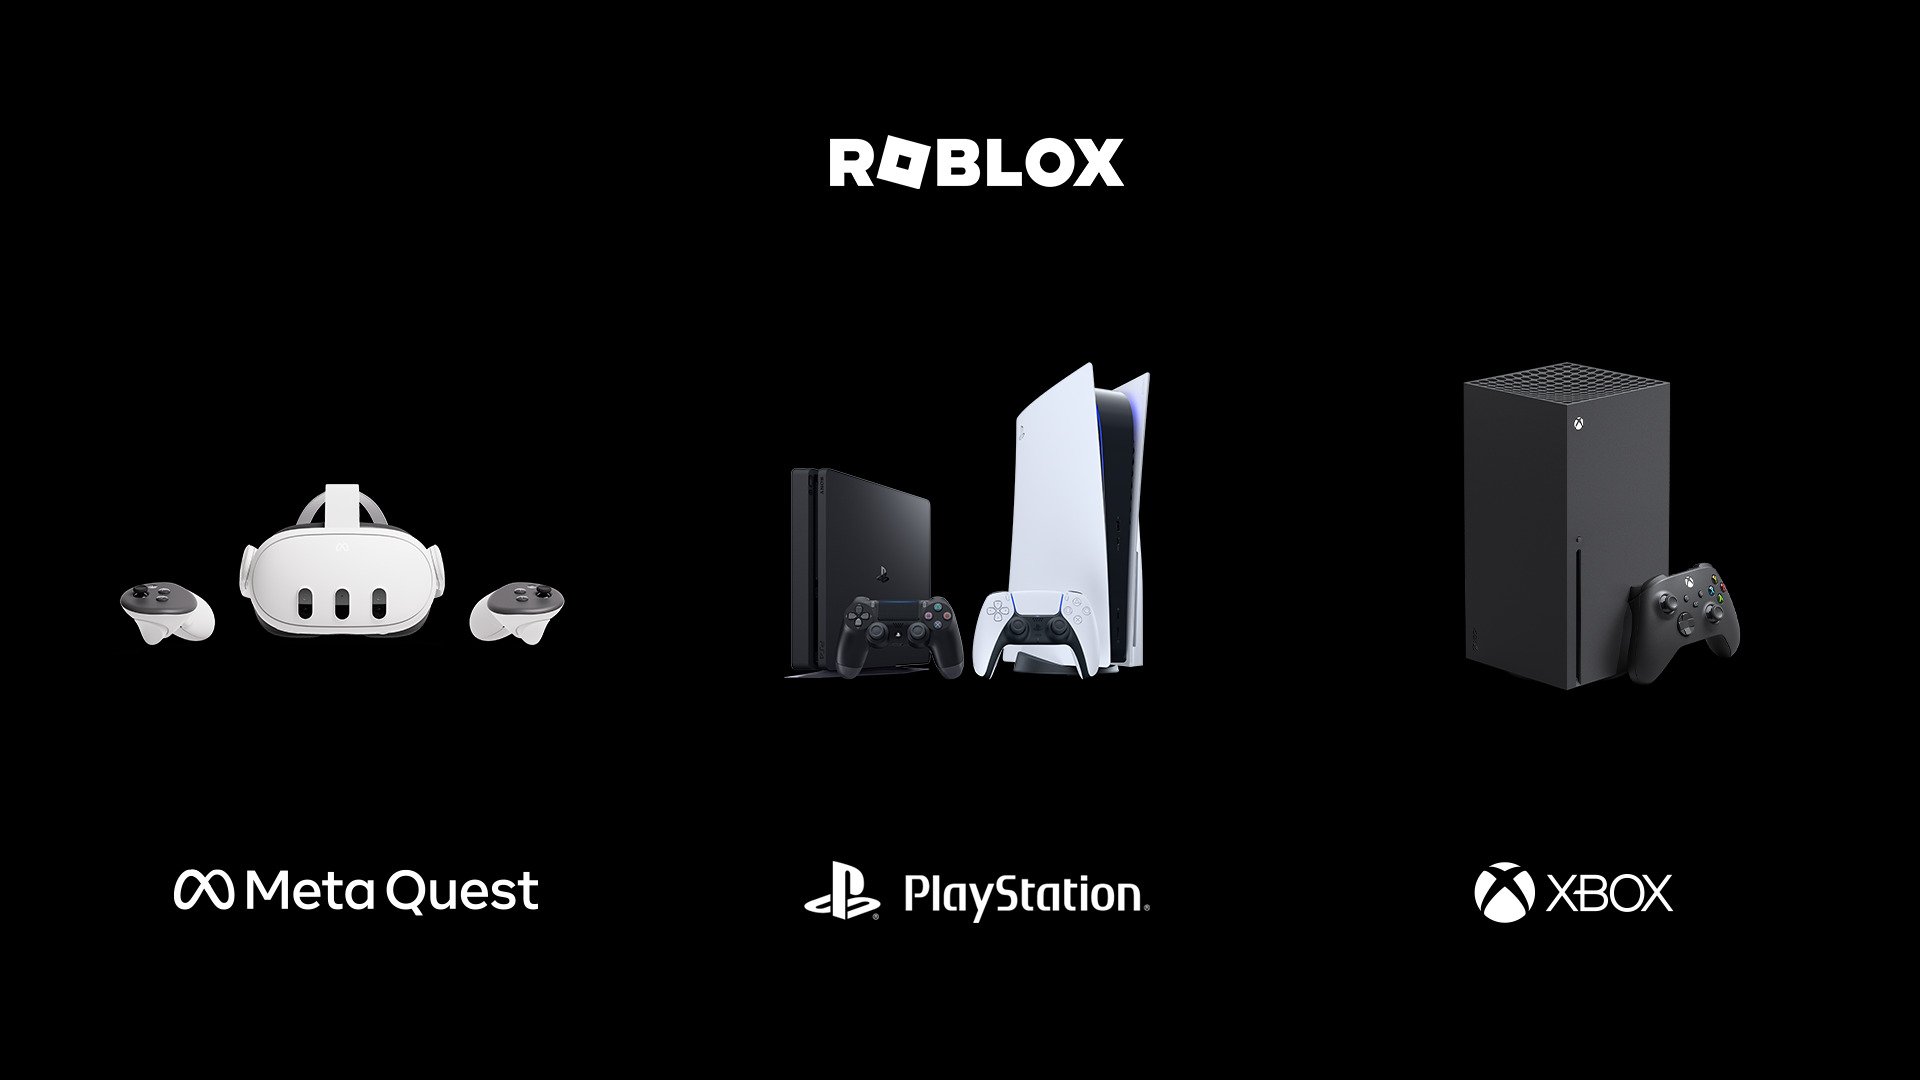 Roblox Coming to PS4 and PS5 in October